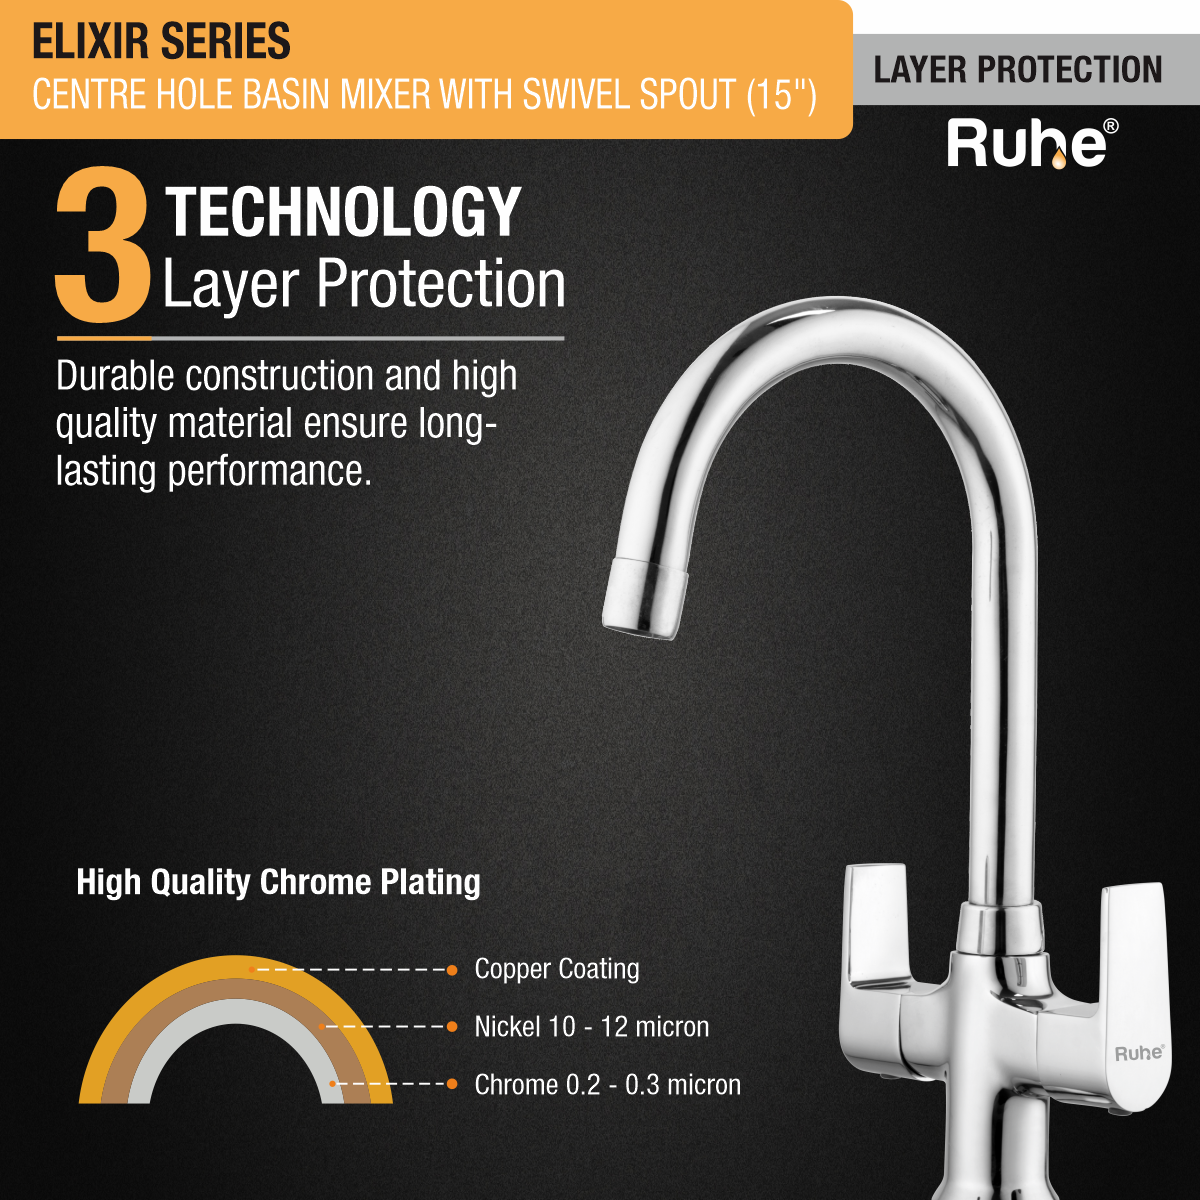 Elixir Centre Hole Basin Mixer with Medium (15 inches) Round Swivel Spout Faucet 3 layer protection